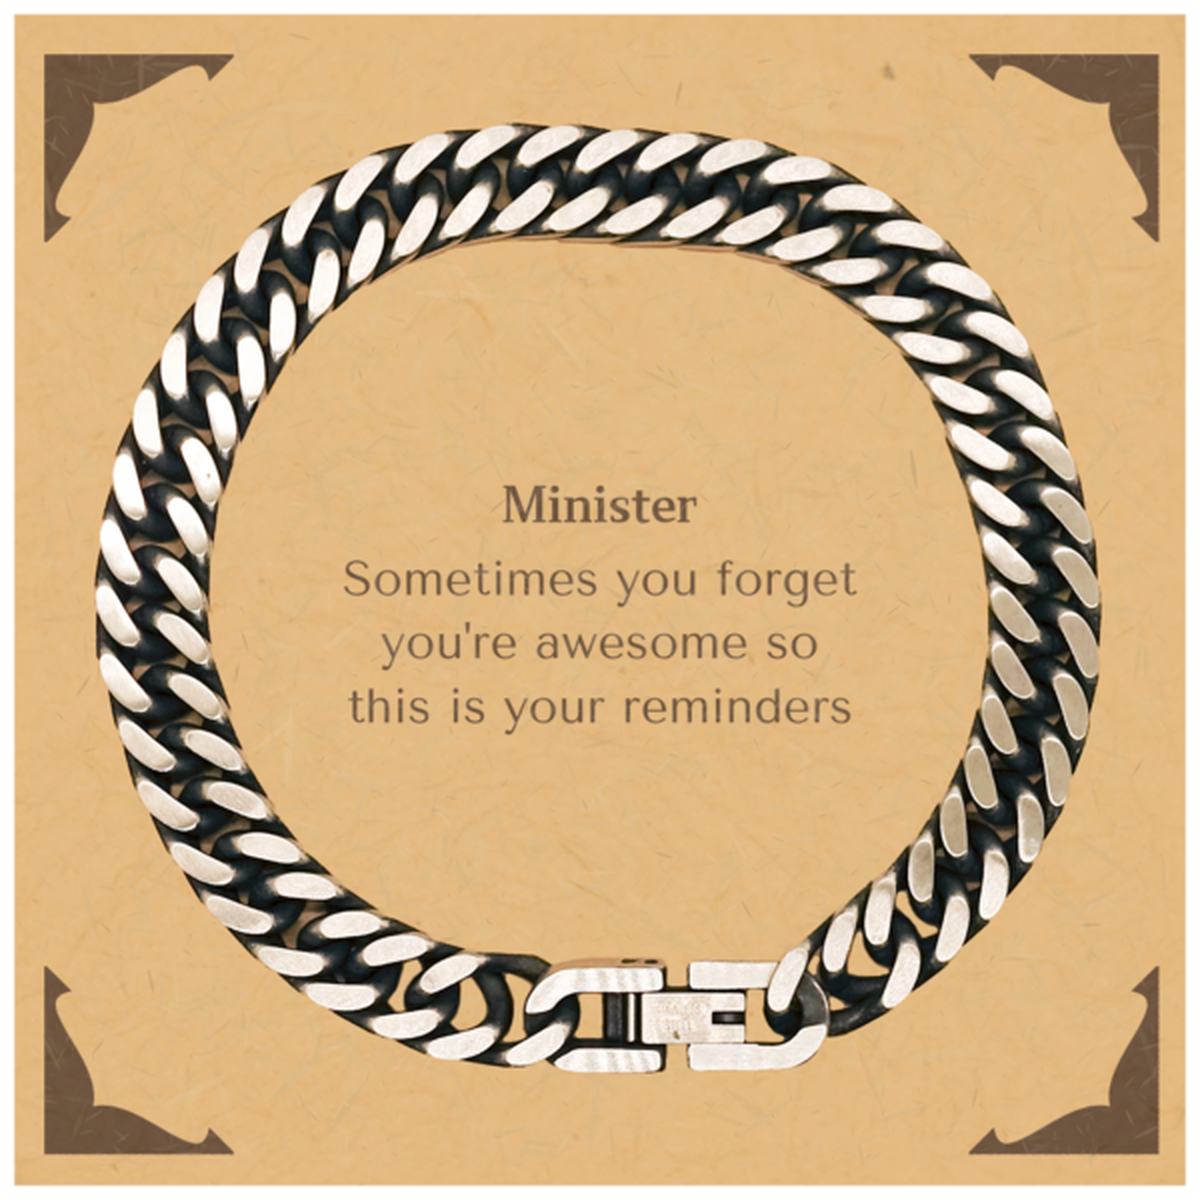 Sentimental Minister Cuban Link Chain Bracelet, Minister Sometimes you forget you're awesome so this is your reminders, Graduation Christmas Birthday Gifts for Minister, Men, Women, Coworkers